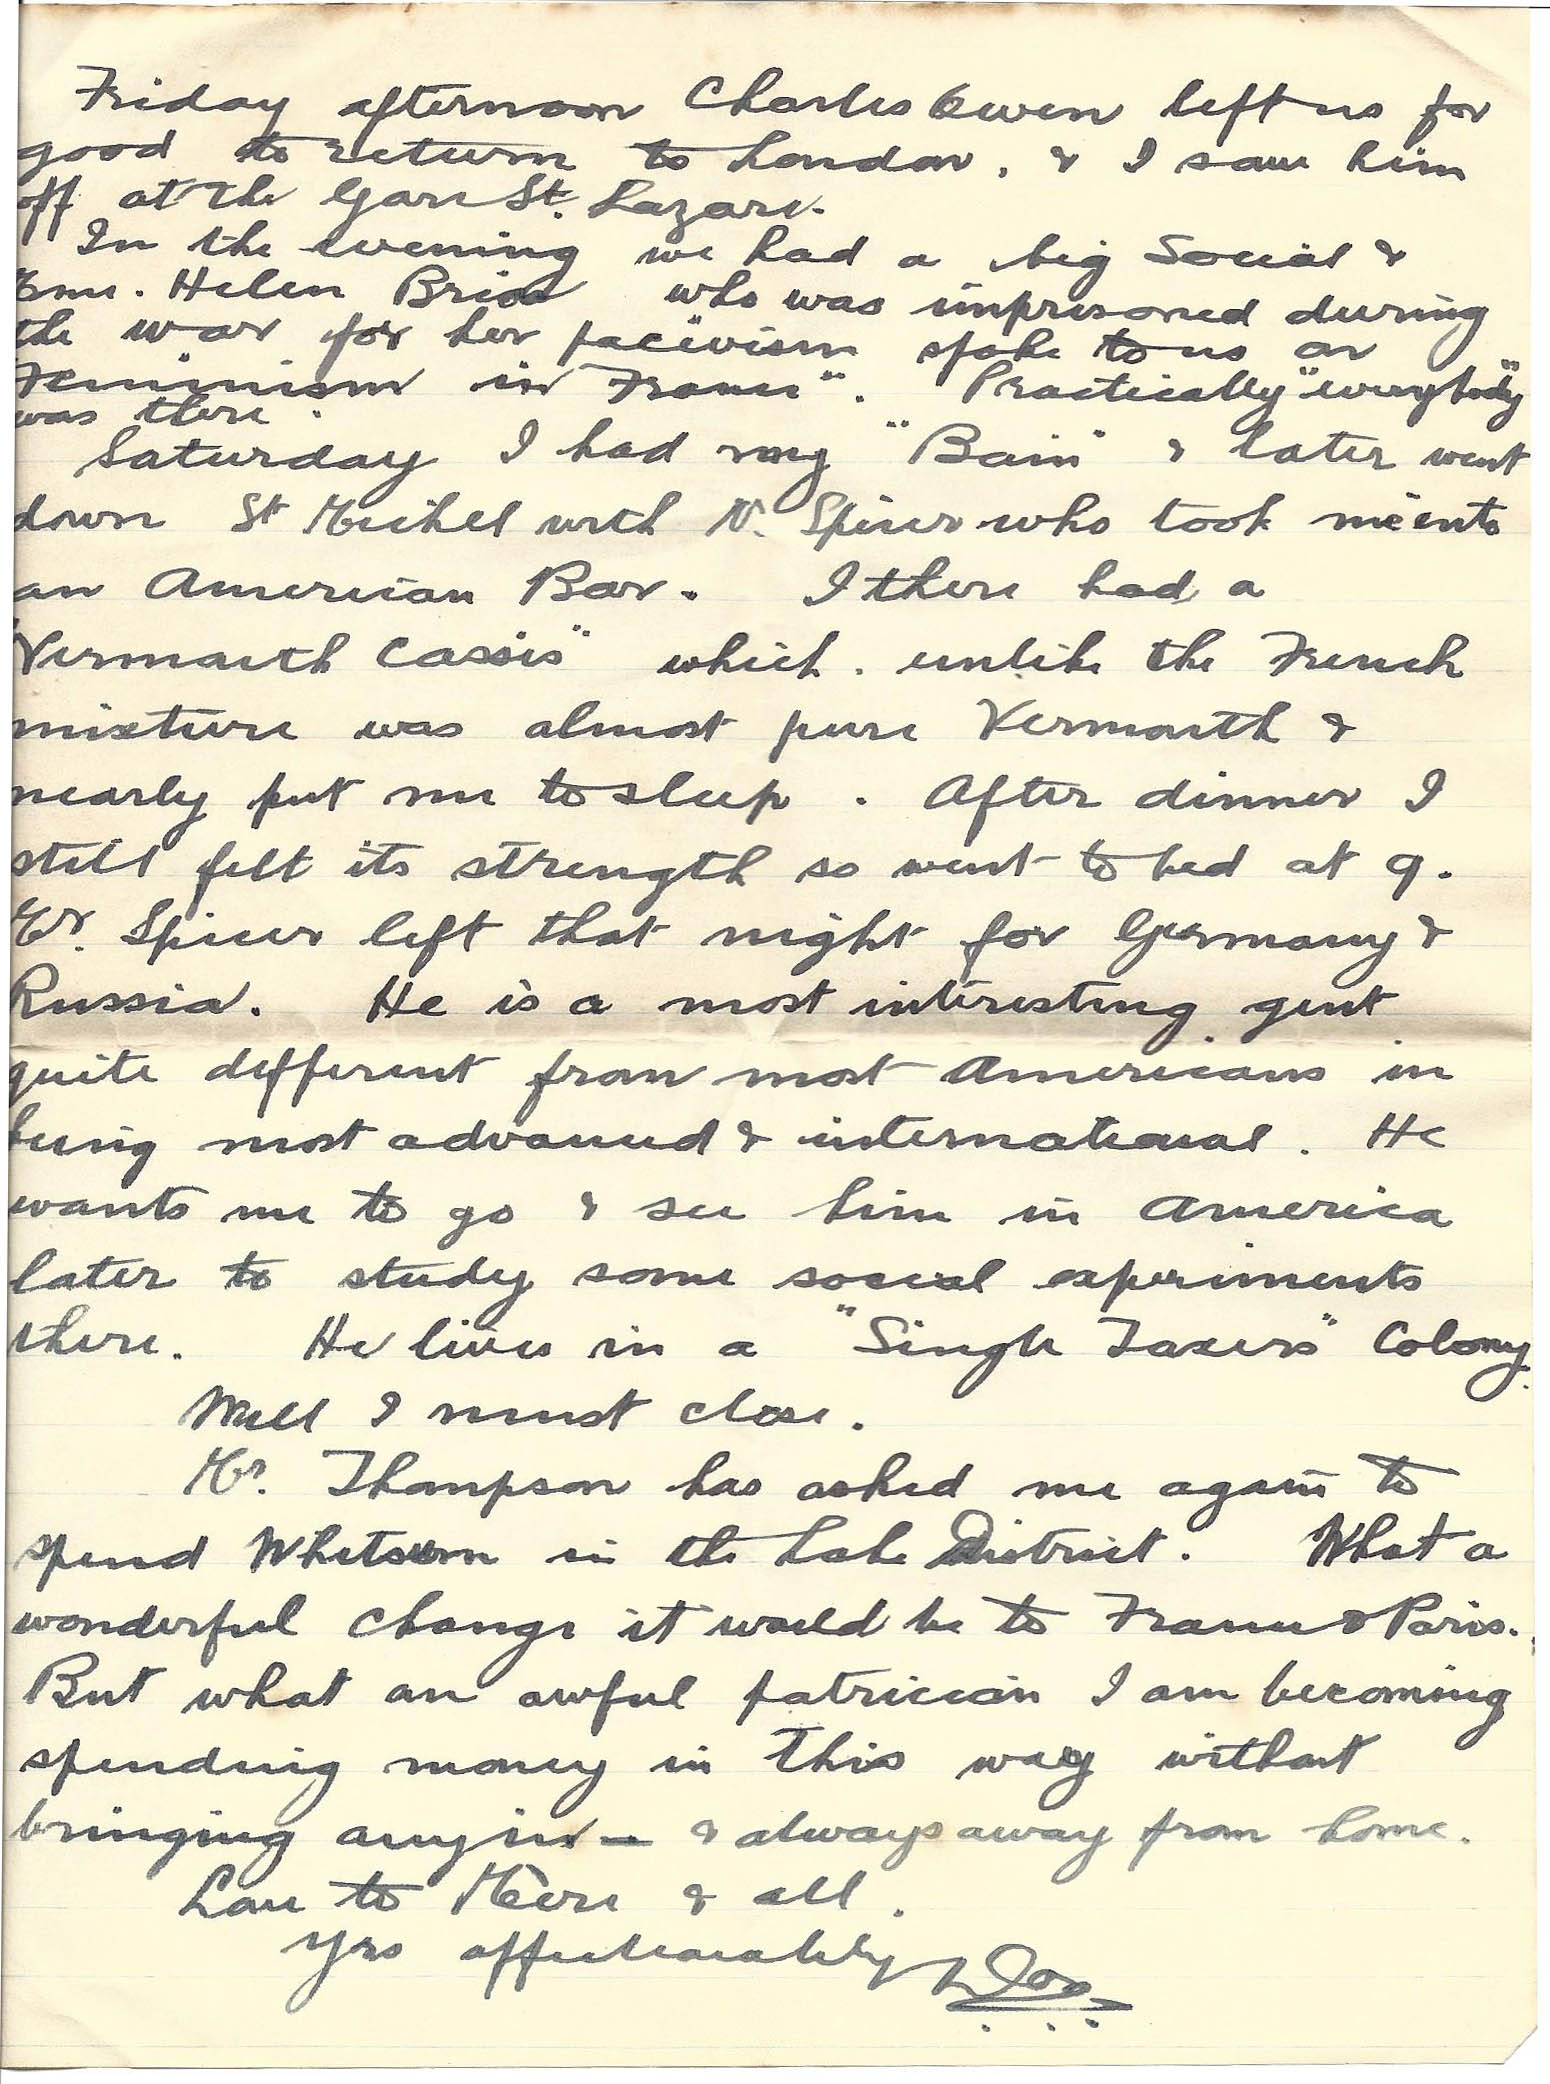 1920-03-14 p3 Donald Bearman letter to his father